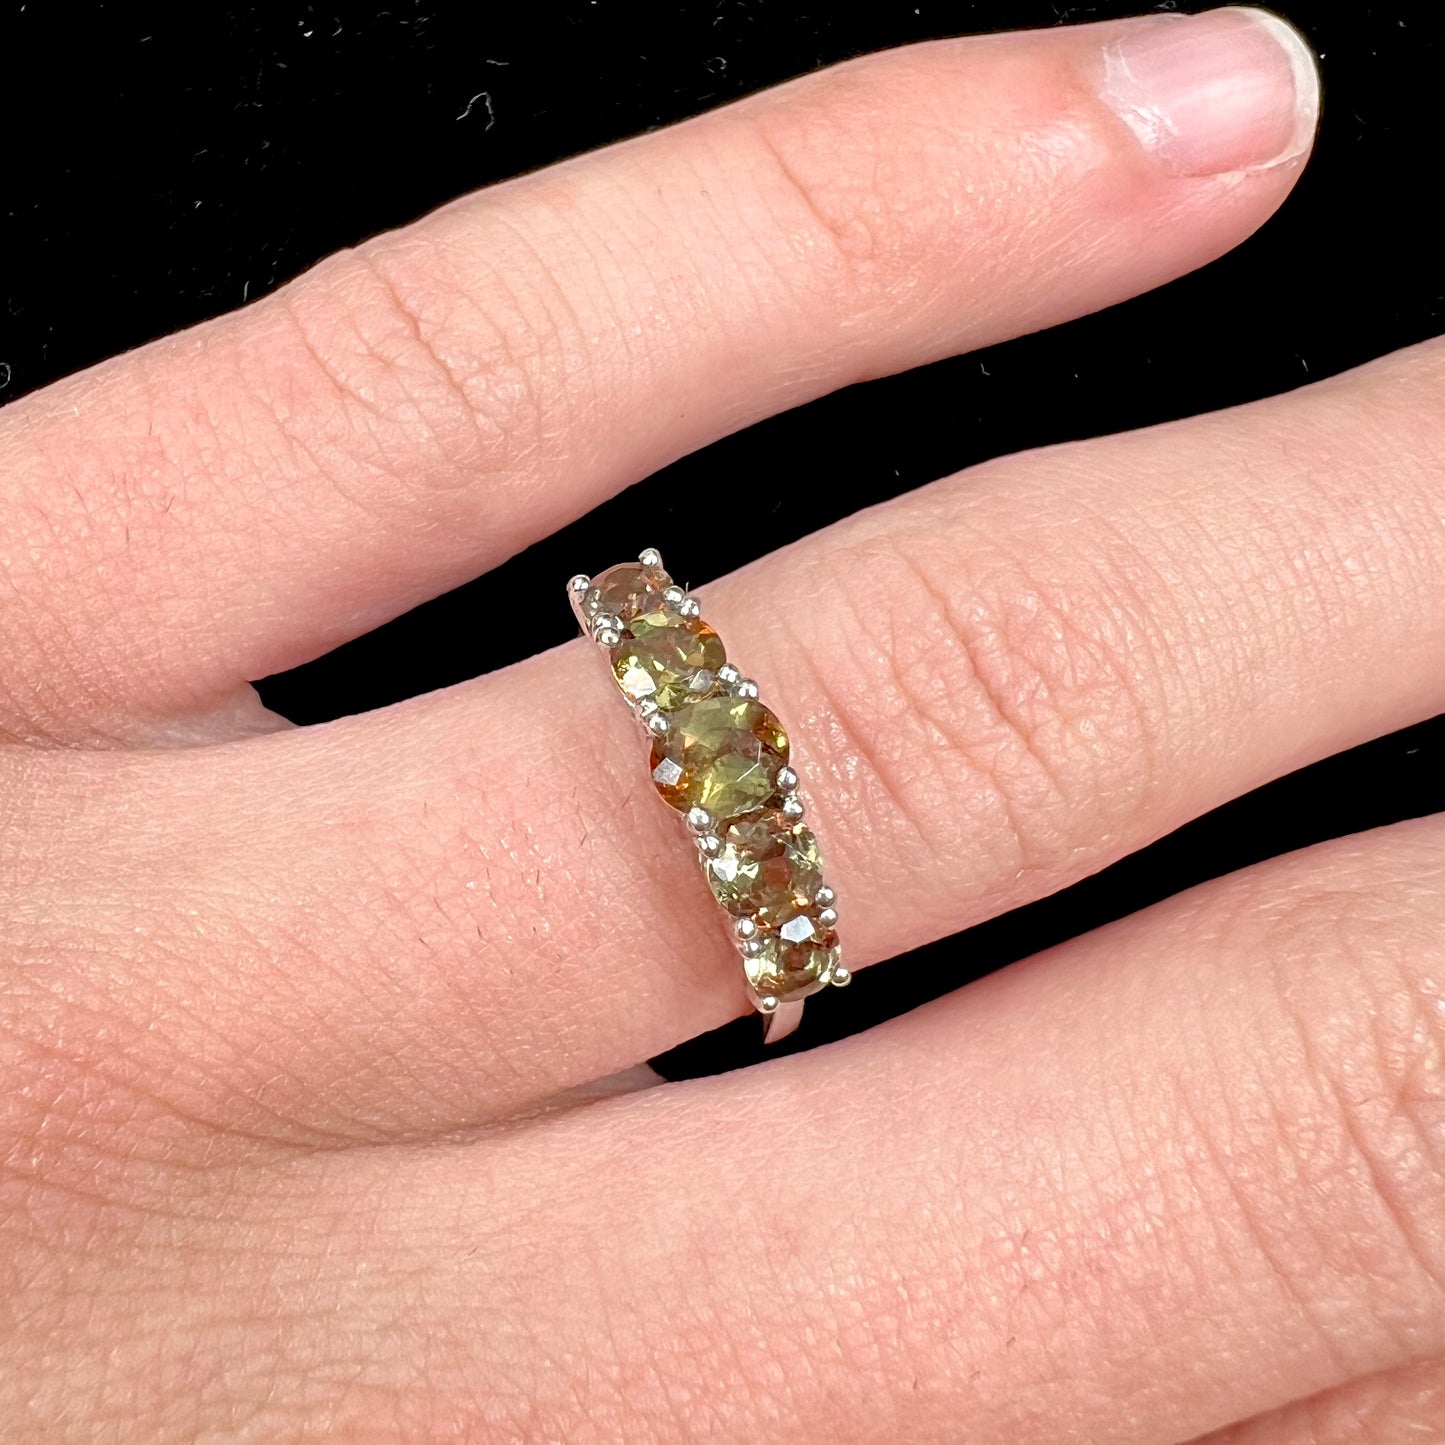 A sterling silver stackable ring set with five faceted oval and round andalusite stones.